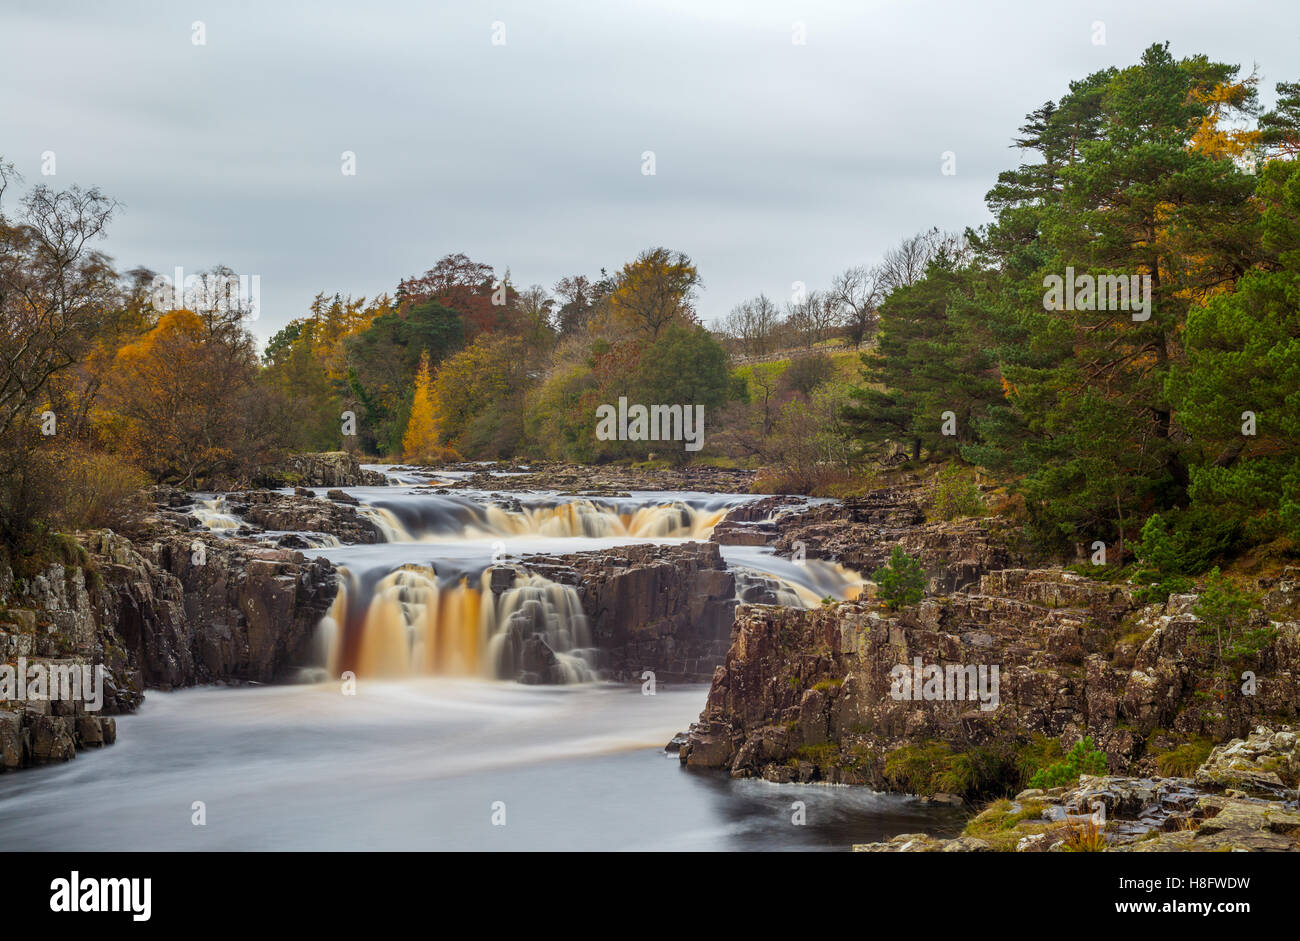 Low Force waterfall in Upper Teesdale, Stock Photo